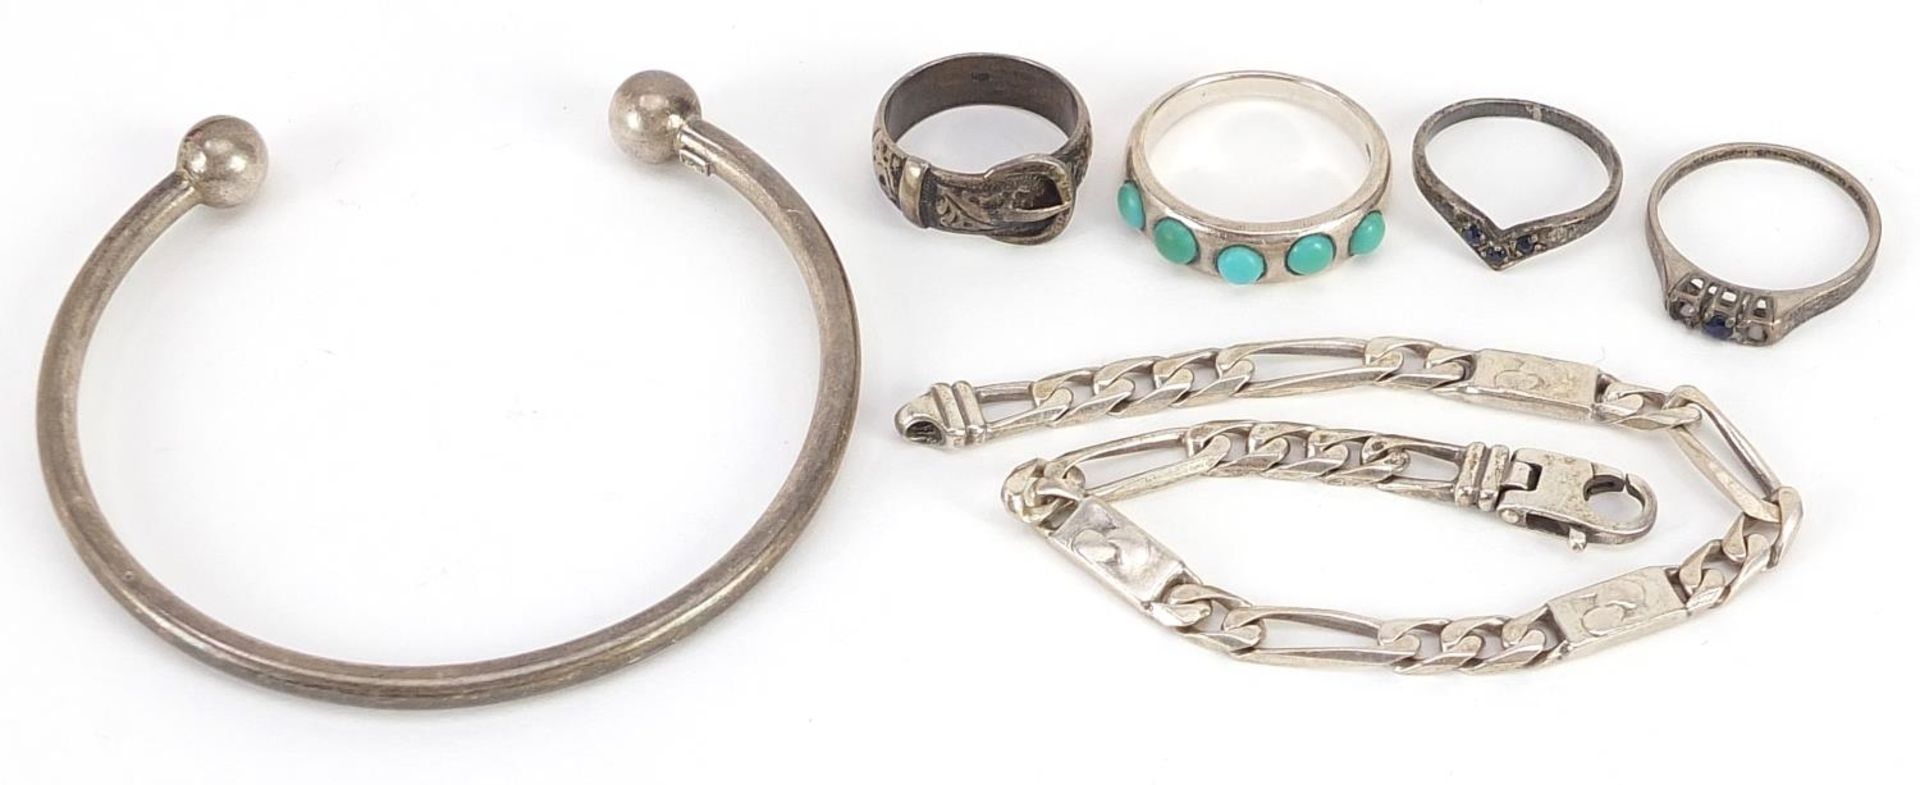 Silver jewellery including Figaro link bracelet, rings and bangle, 31.5g